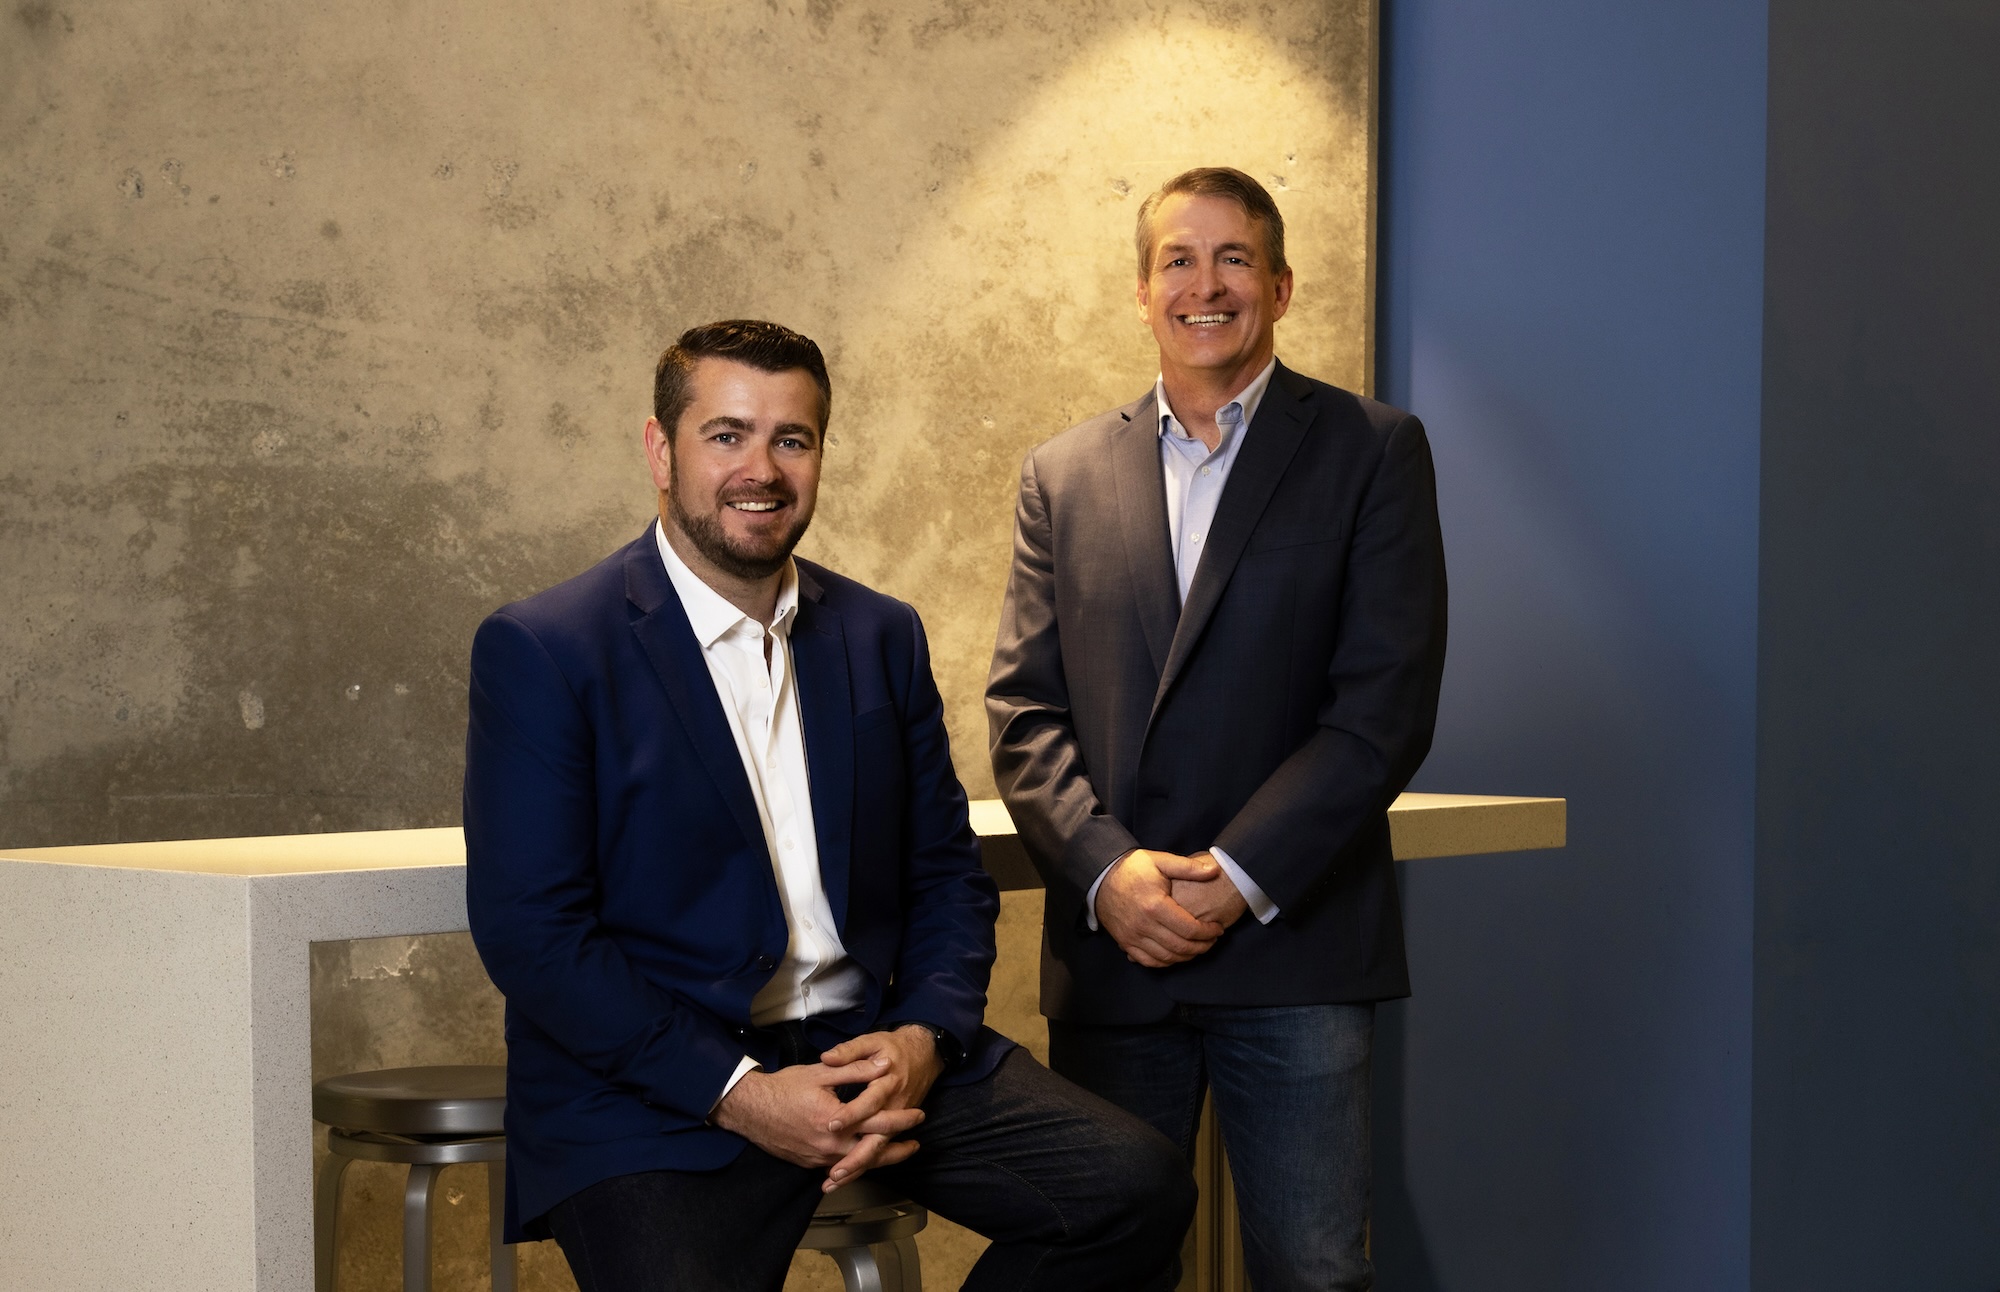 AlfaTech names new CEO and COO appointments: Diarmuid Hartley and Tim Chadwick, PE, LEED AP